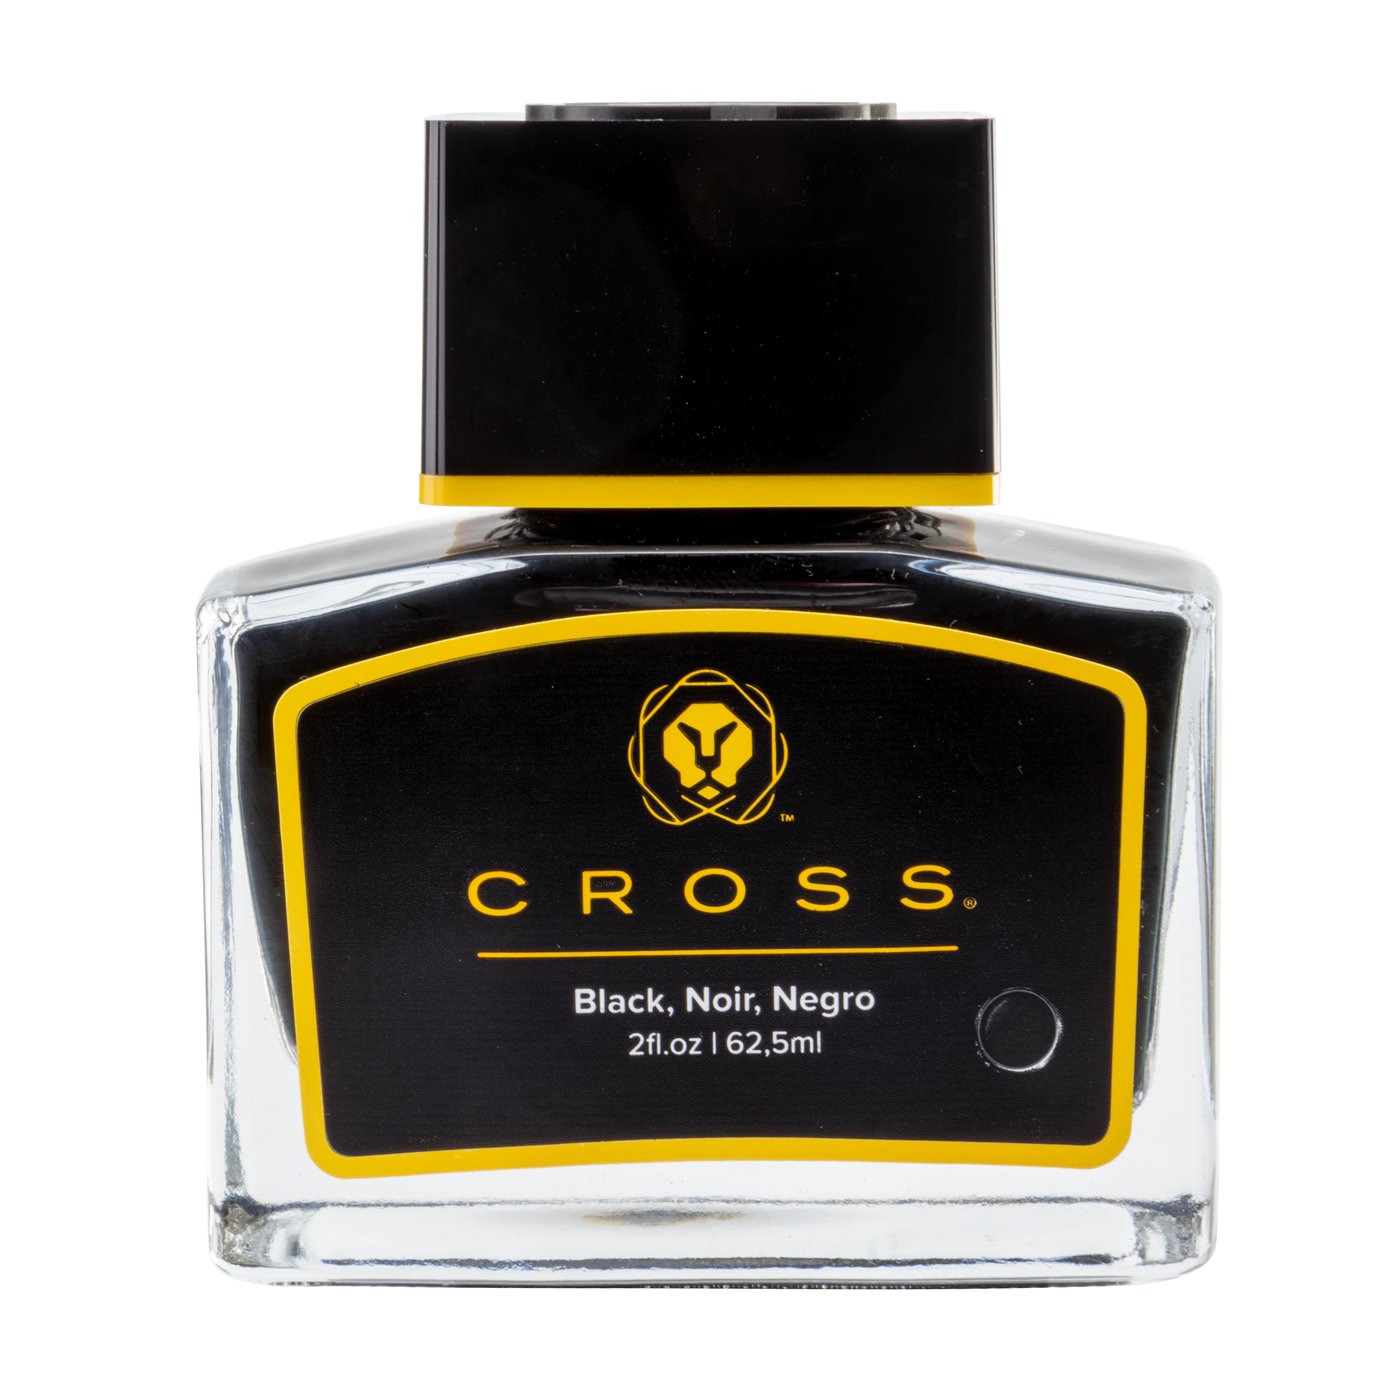 Ink from T. Cross Company, made in China. This Ink comes in 6 colors  cross is know world wide for their quality pens and inks.   These inks are for wordsmithing, hand lettering, writing, calligraphy, drawing, and art.